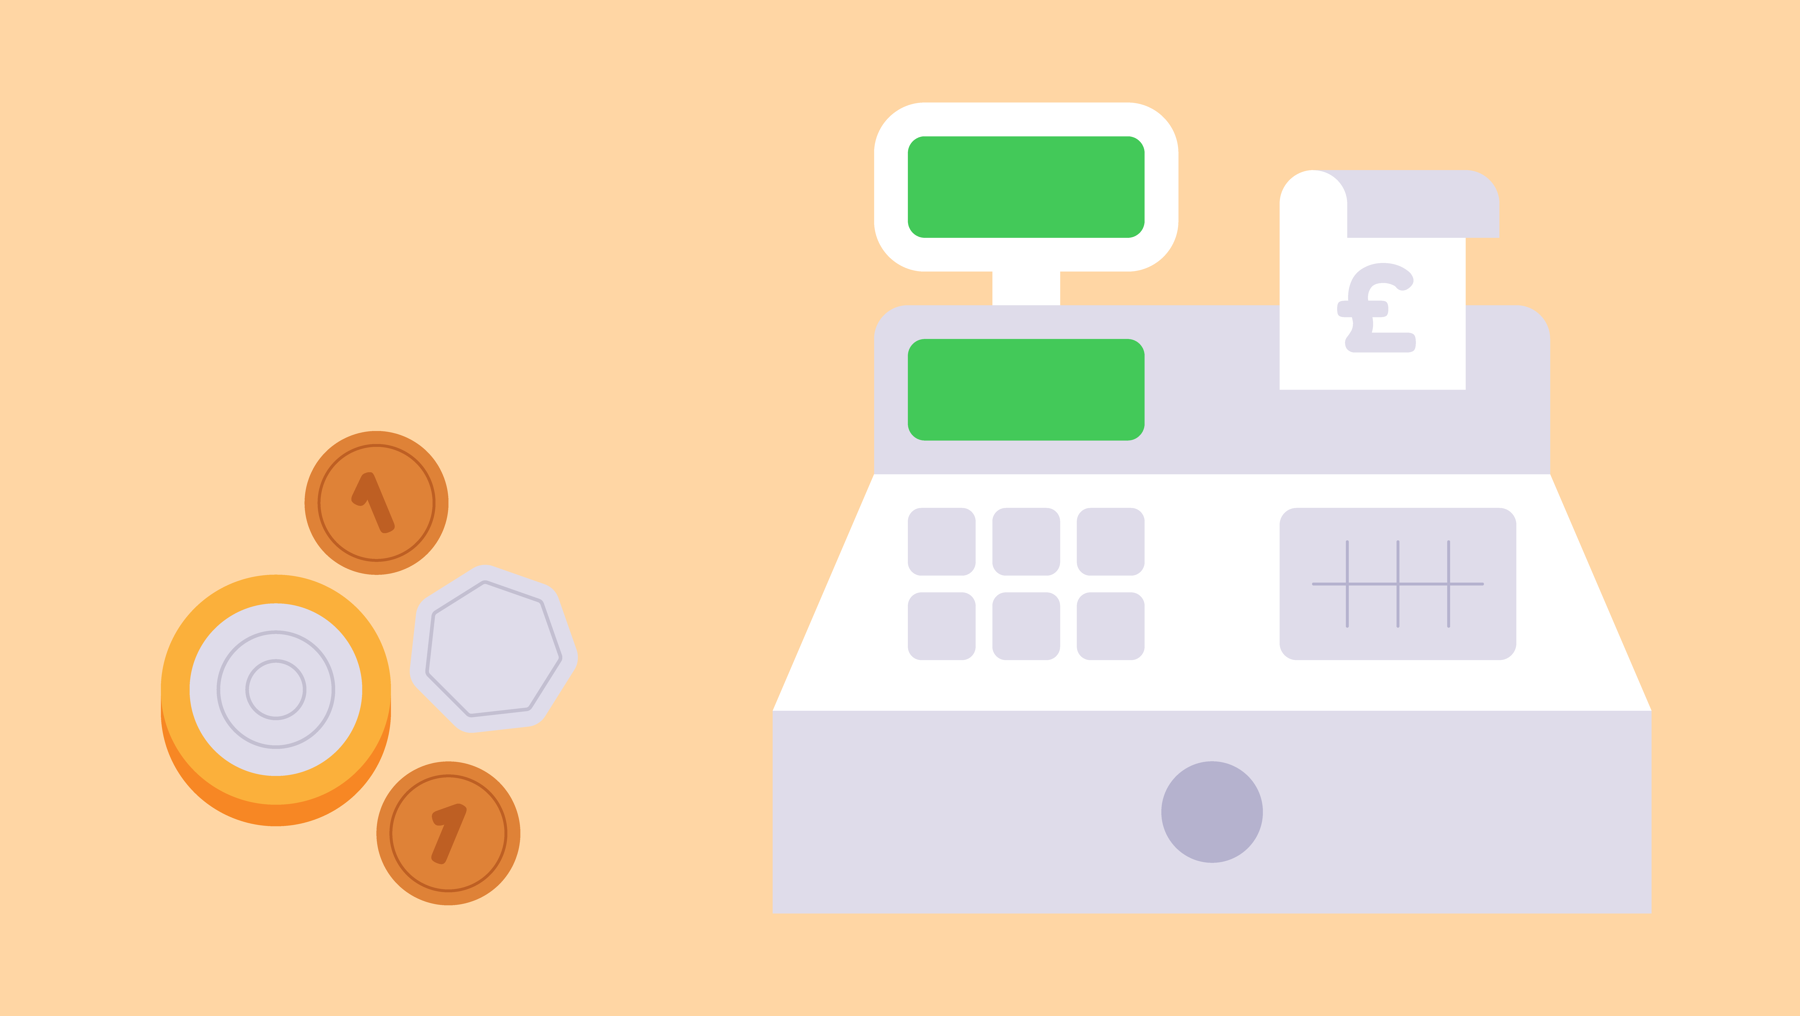 An illustration of some coins next to a cash register.